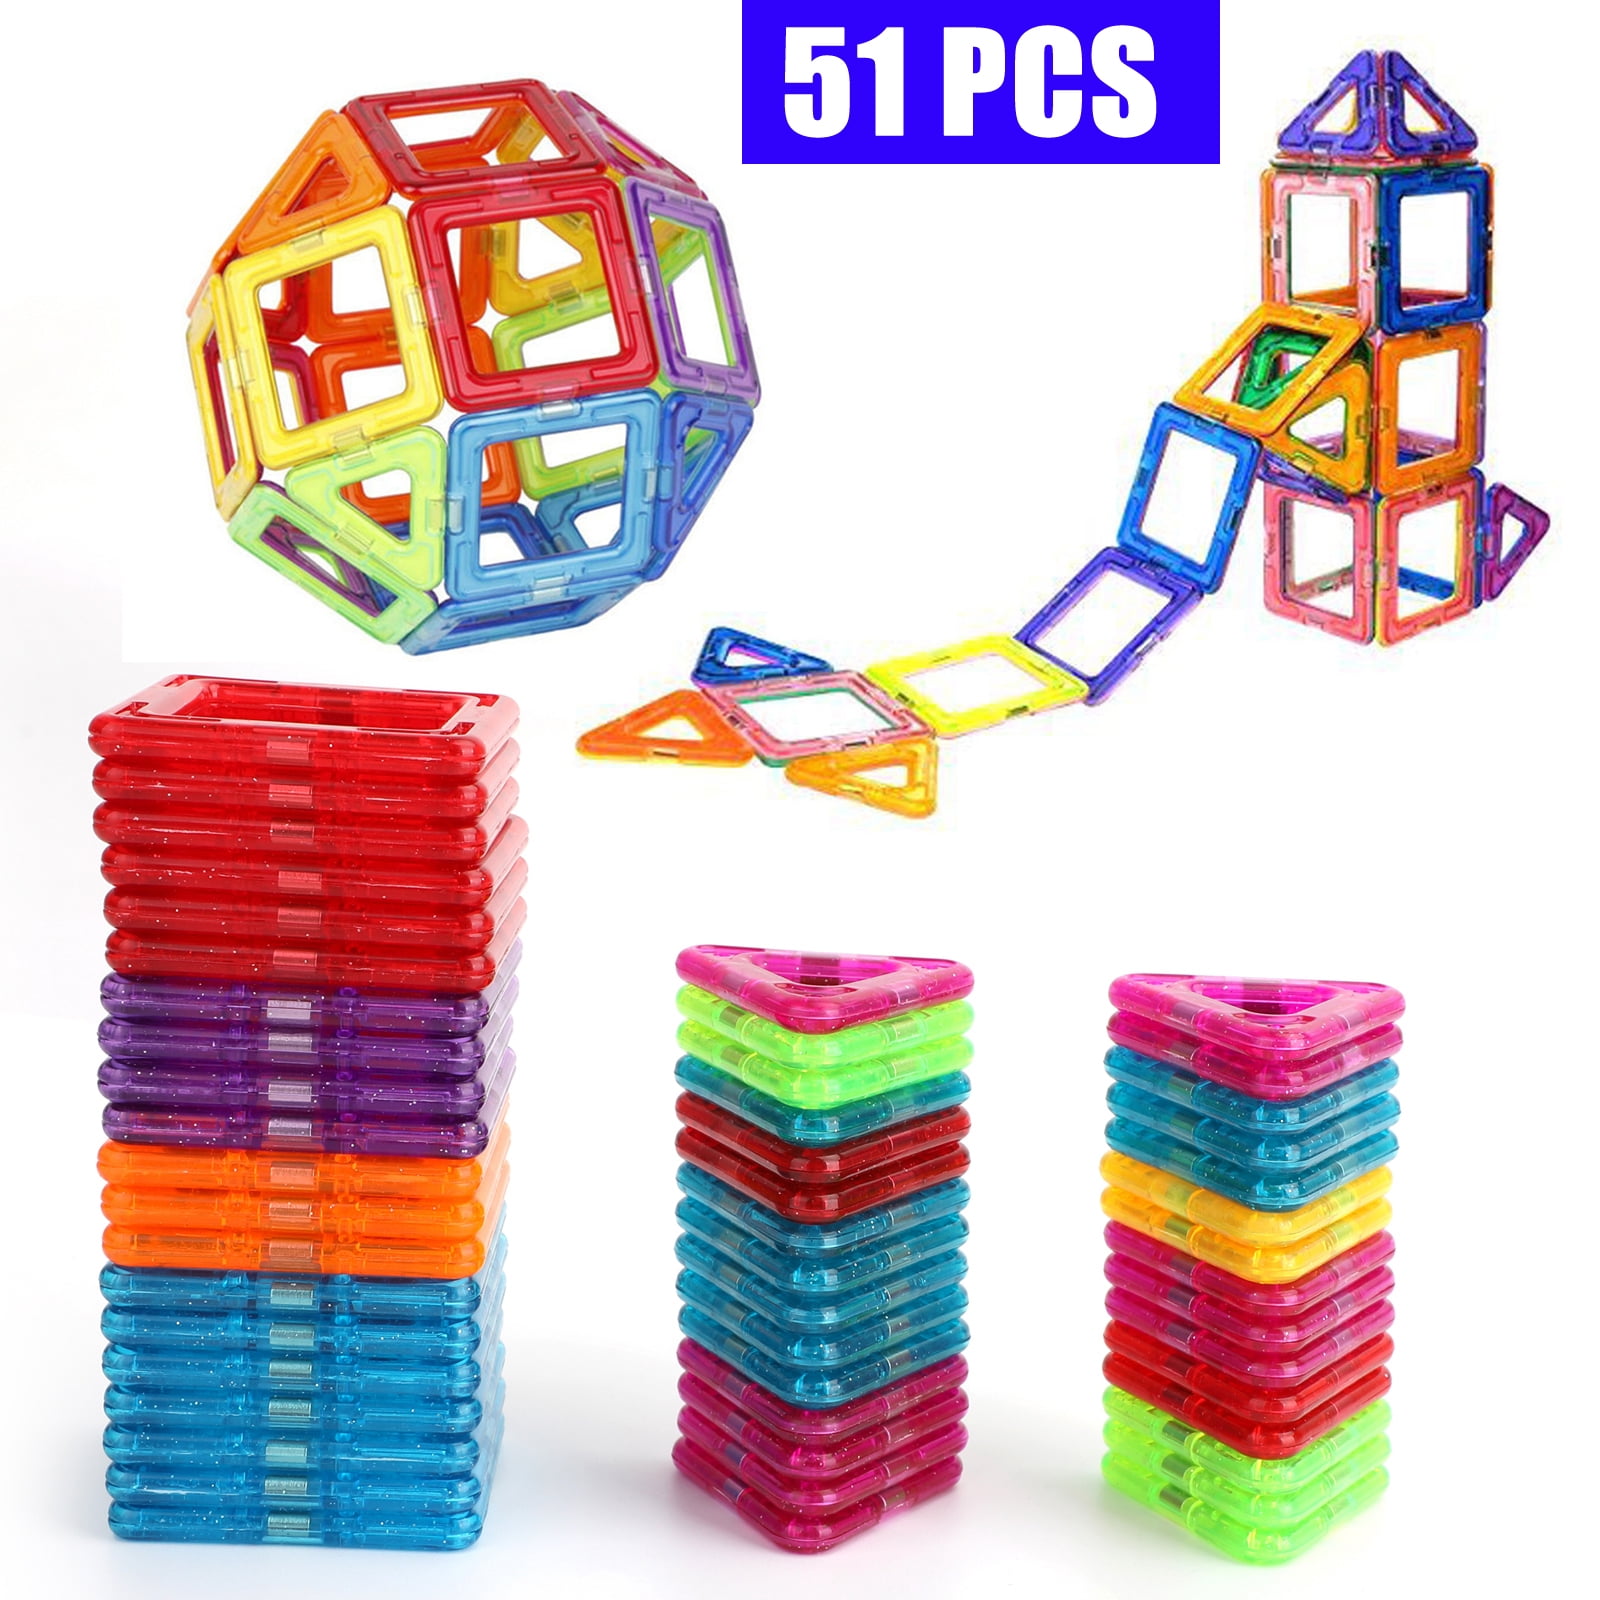 Magnetic Building Tiles Block Kids Construction Educational Toy Release Stress 